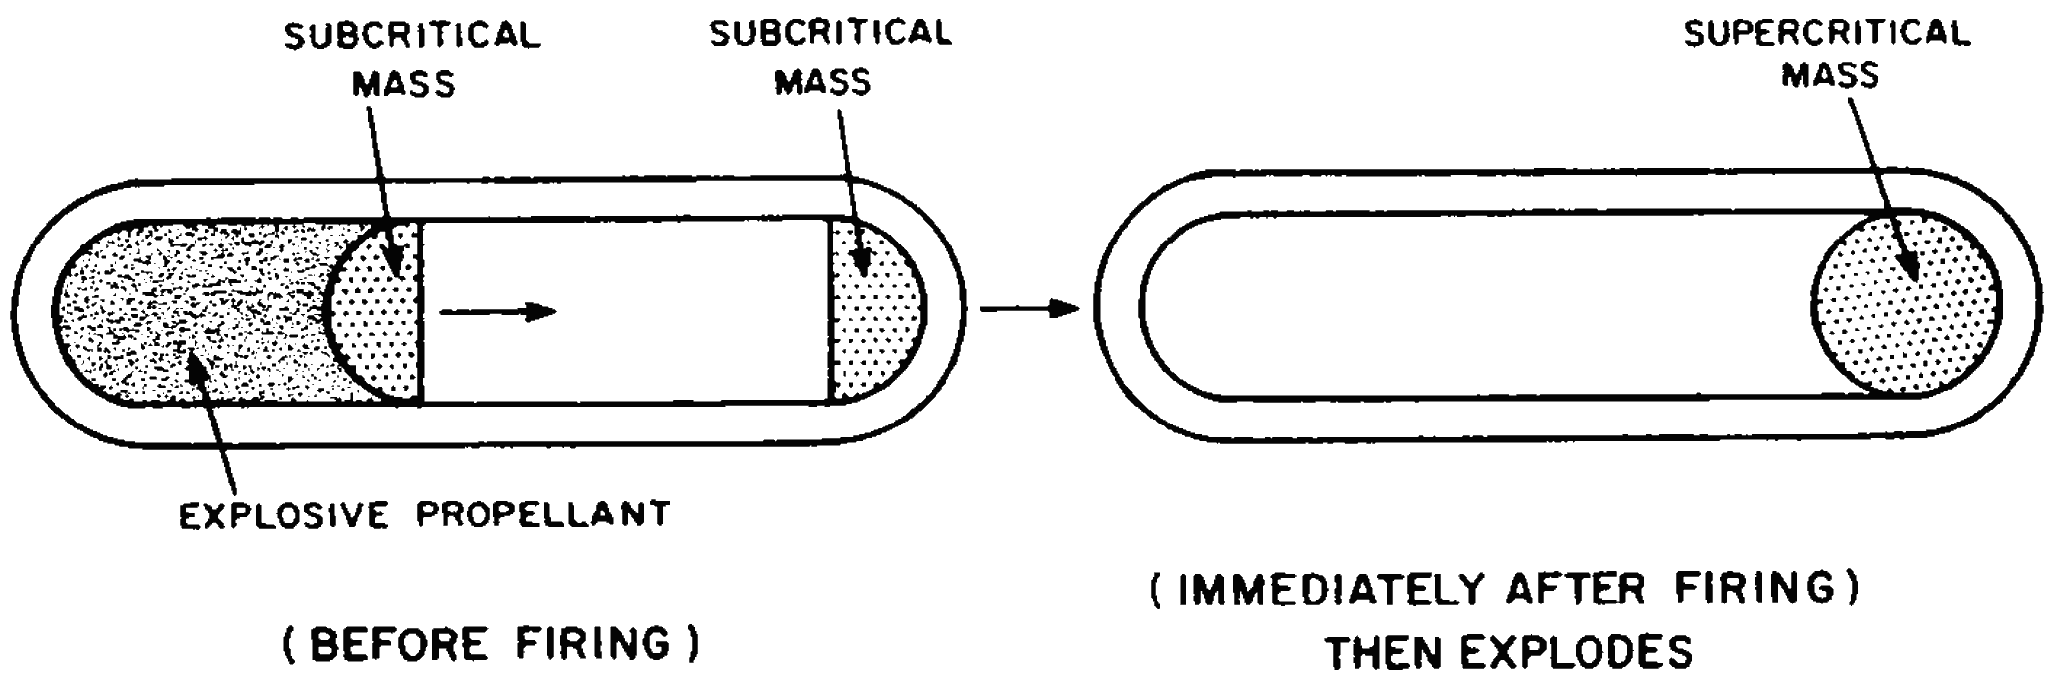 On the left is a lozenge-shaped outline labeled “(BEFORE FIRING)” which represents the core of a “gun-barrel” device. Inside the lozenge, the left side is filled with a grainy pattern labeled “explosive propellant”.  Just to the right of that is a hemi-circle labeled “subcritical mass”, ending in a vertical wall. An arrow points rightward to the other end of the lozenge shape, where the end cap is filled with another hemi-circle, also labeled “subcritical mass”. Just to the right of the lozenge shape is an arrow pointing to another lozenge shape, this one labeled “(IMMEDIATELY AFTER FIRING) THEN EXPLODES”.  Here, the lozenge is empty except for a single circle illing the rightmost end cap of the lozenge.  The circle is labeled “supercritical mass”.